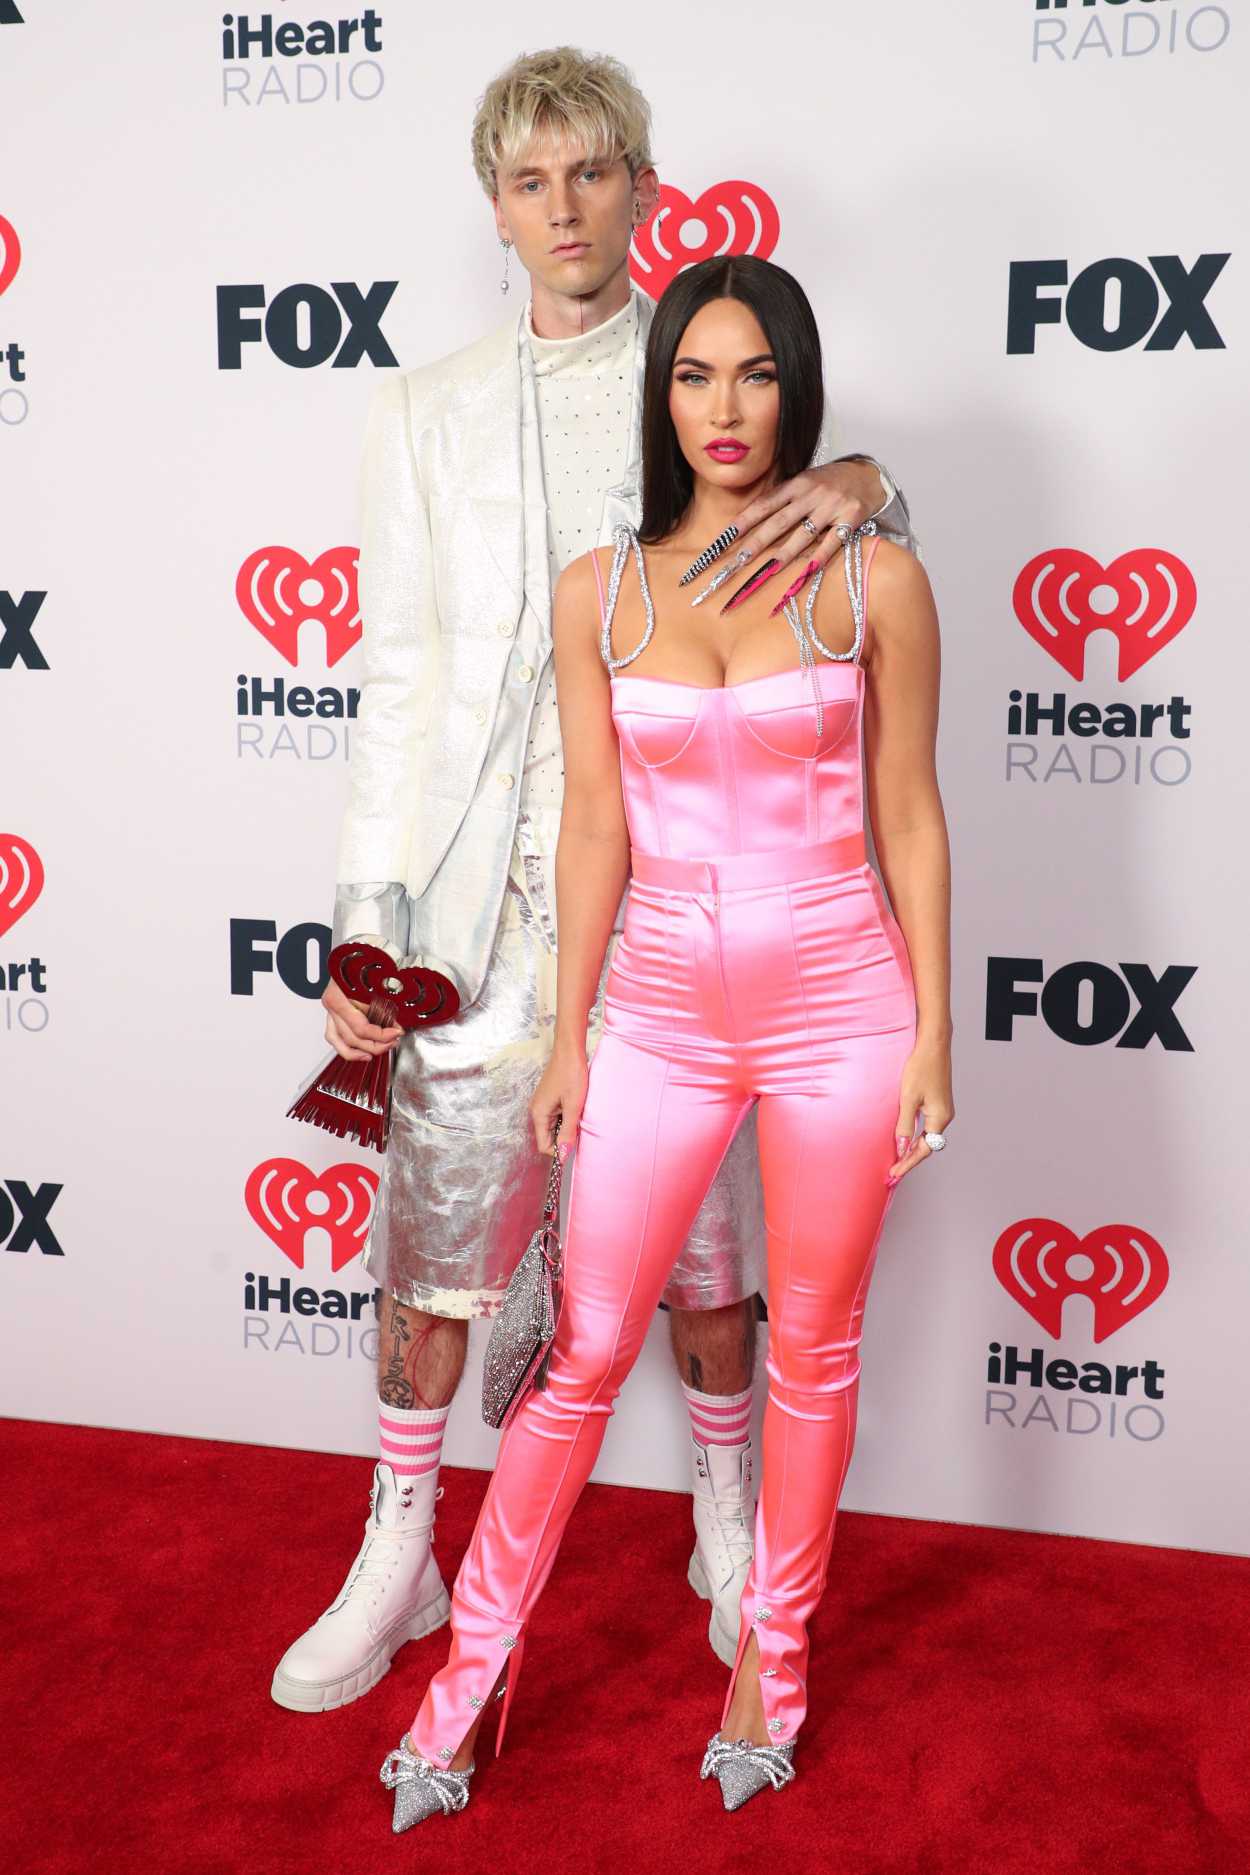 Megan Fox Attends 2021 Iheartradio Music Awards At The Dolby Theatre With Machine Gun Kelly In 